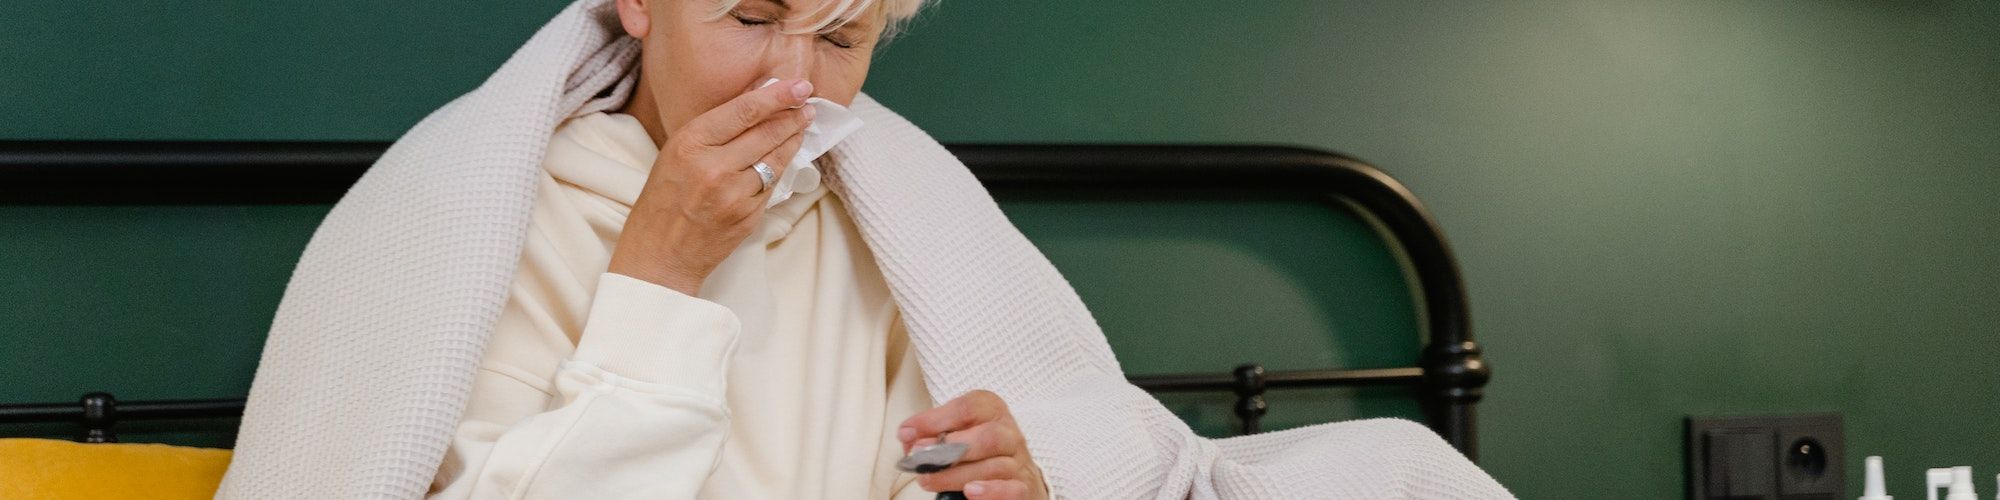 IS THIS THE WORST FLU SEASON EVER?